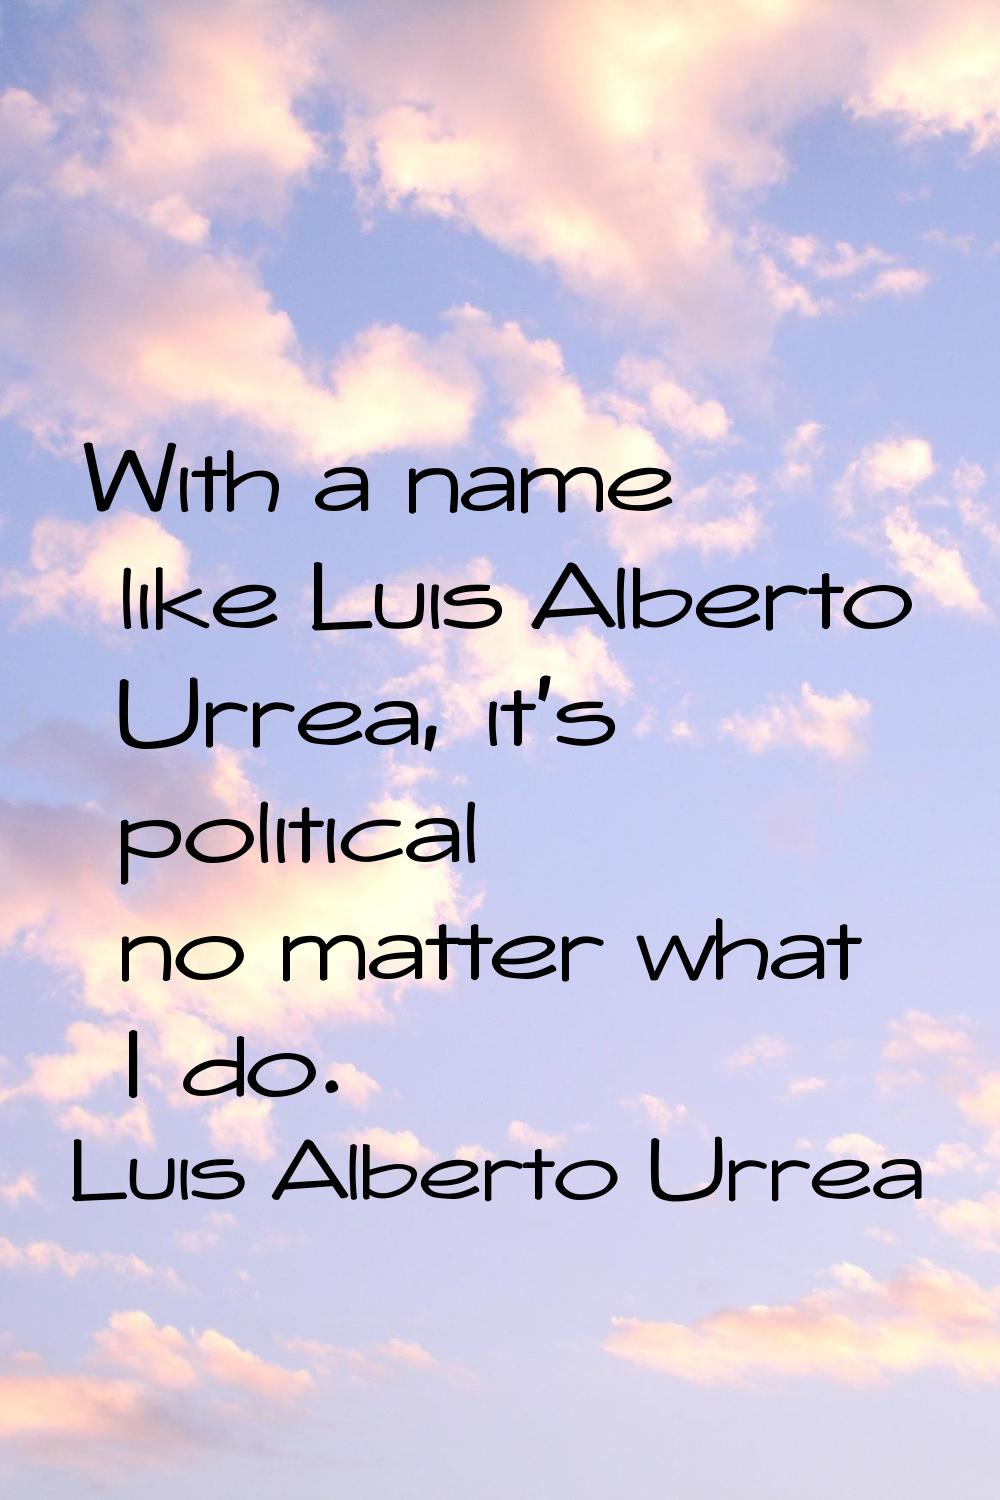 With a name like Luis Alberto Urrea, it's political no matter what I do.